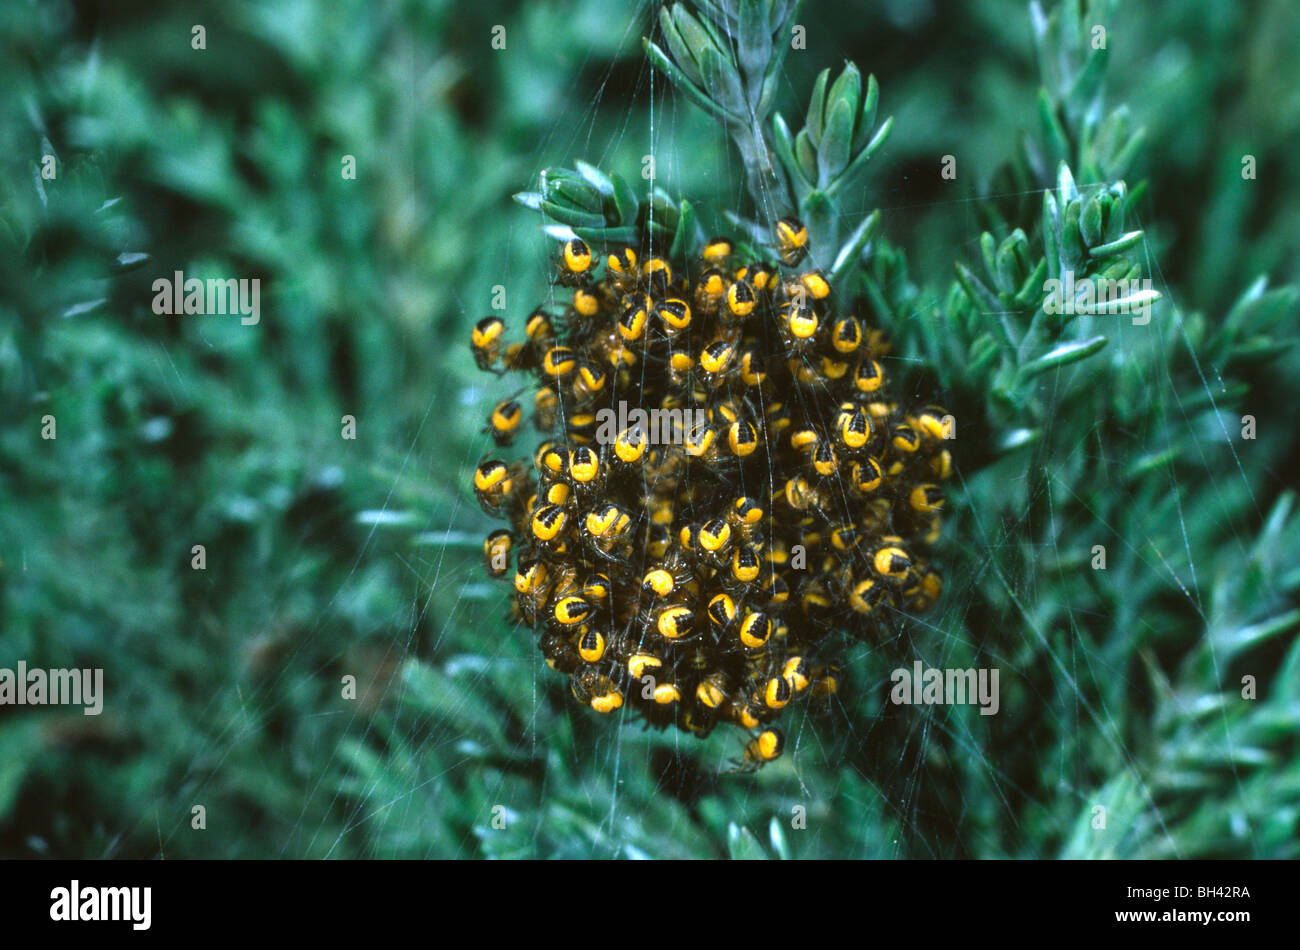 Spiderlings (Araneus diadematus) in a tight cluster in web amongst foliage in garden. Stock Photo